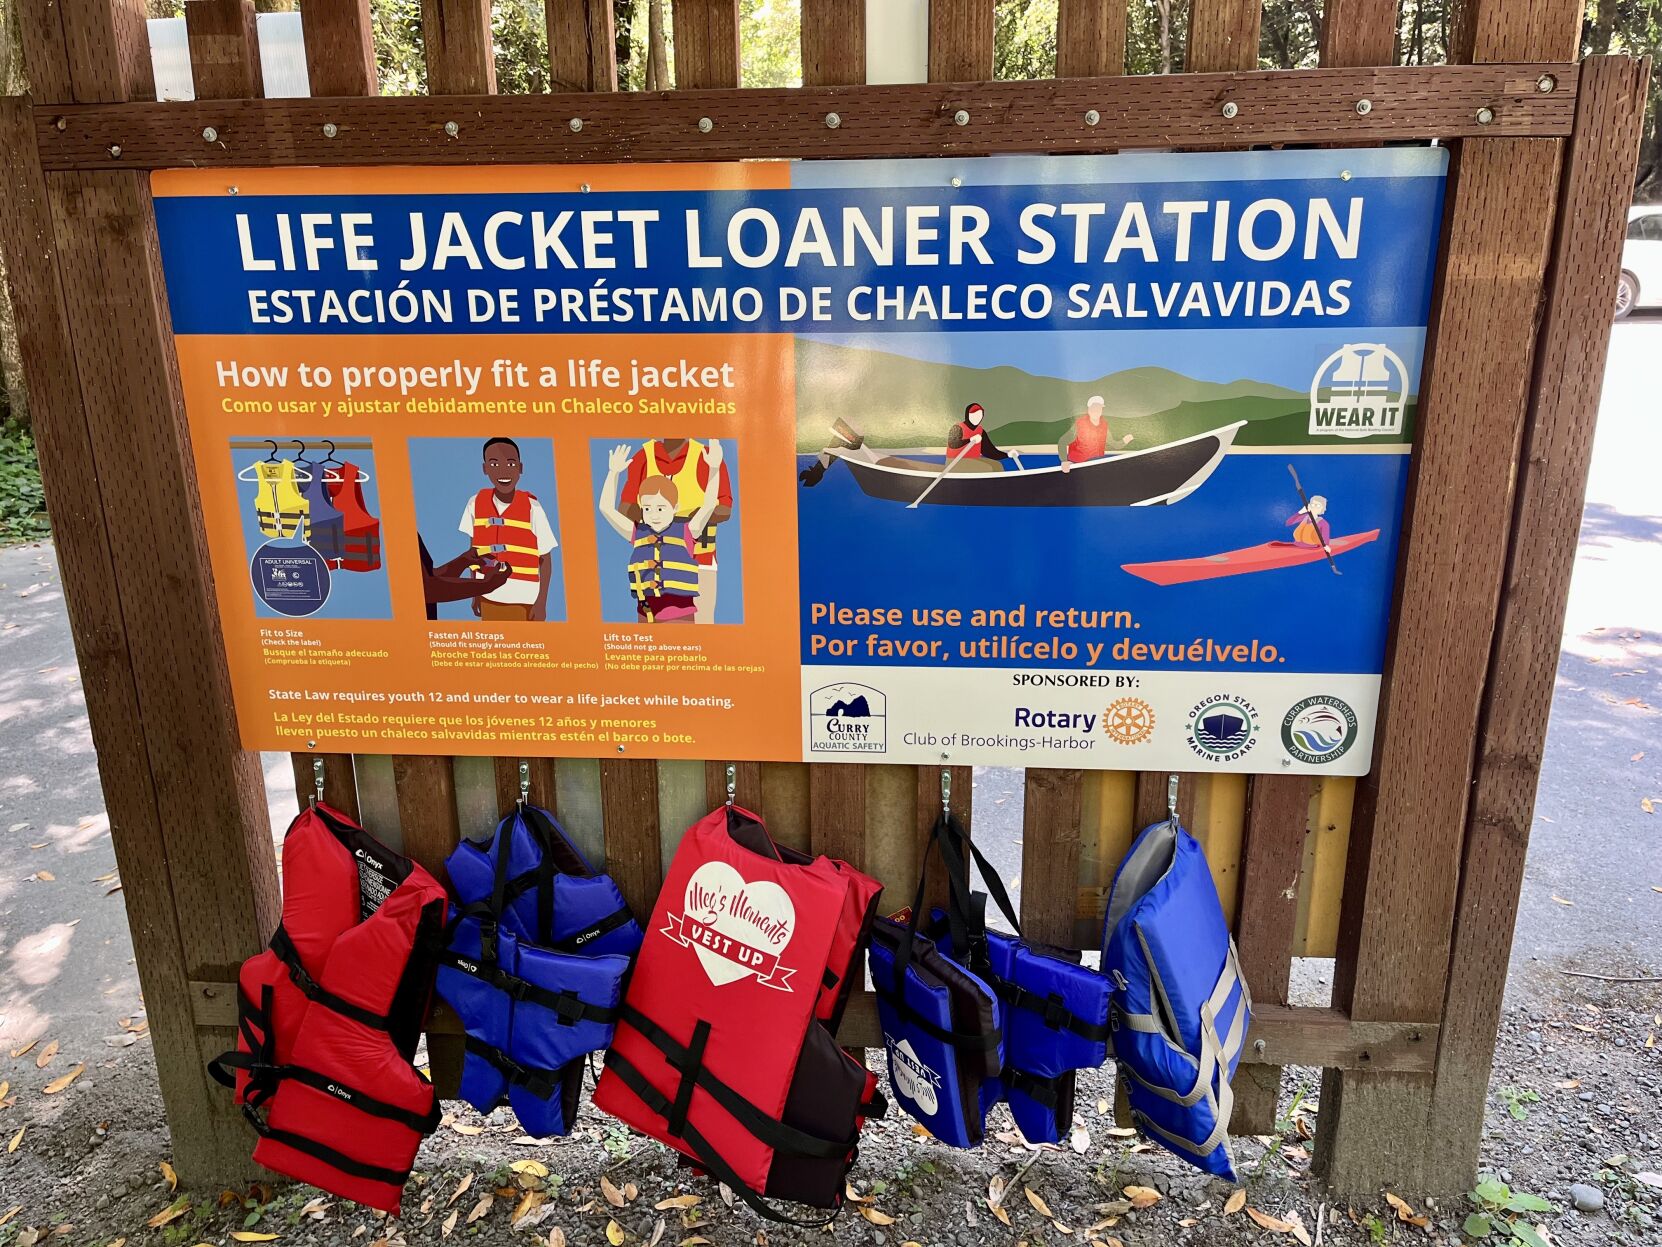 NSW lifejacket reforms announcement | 9 July 2010: NSW Ports… | Flickr